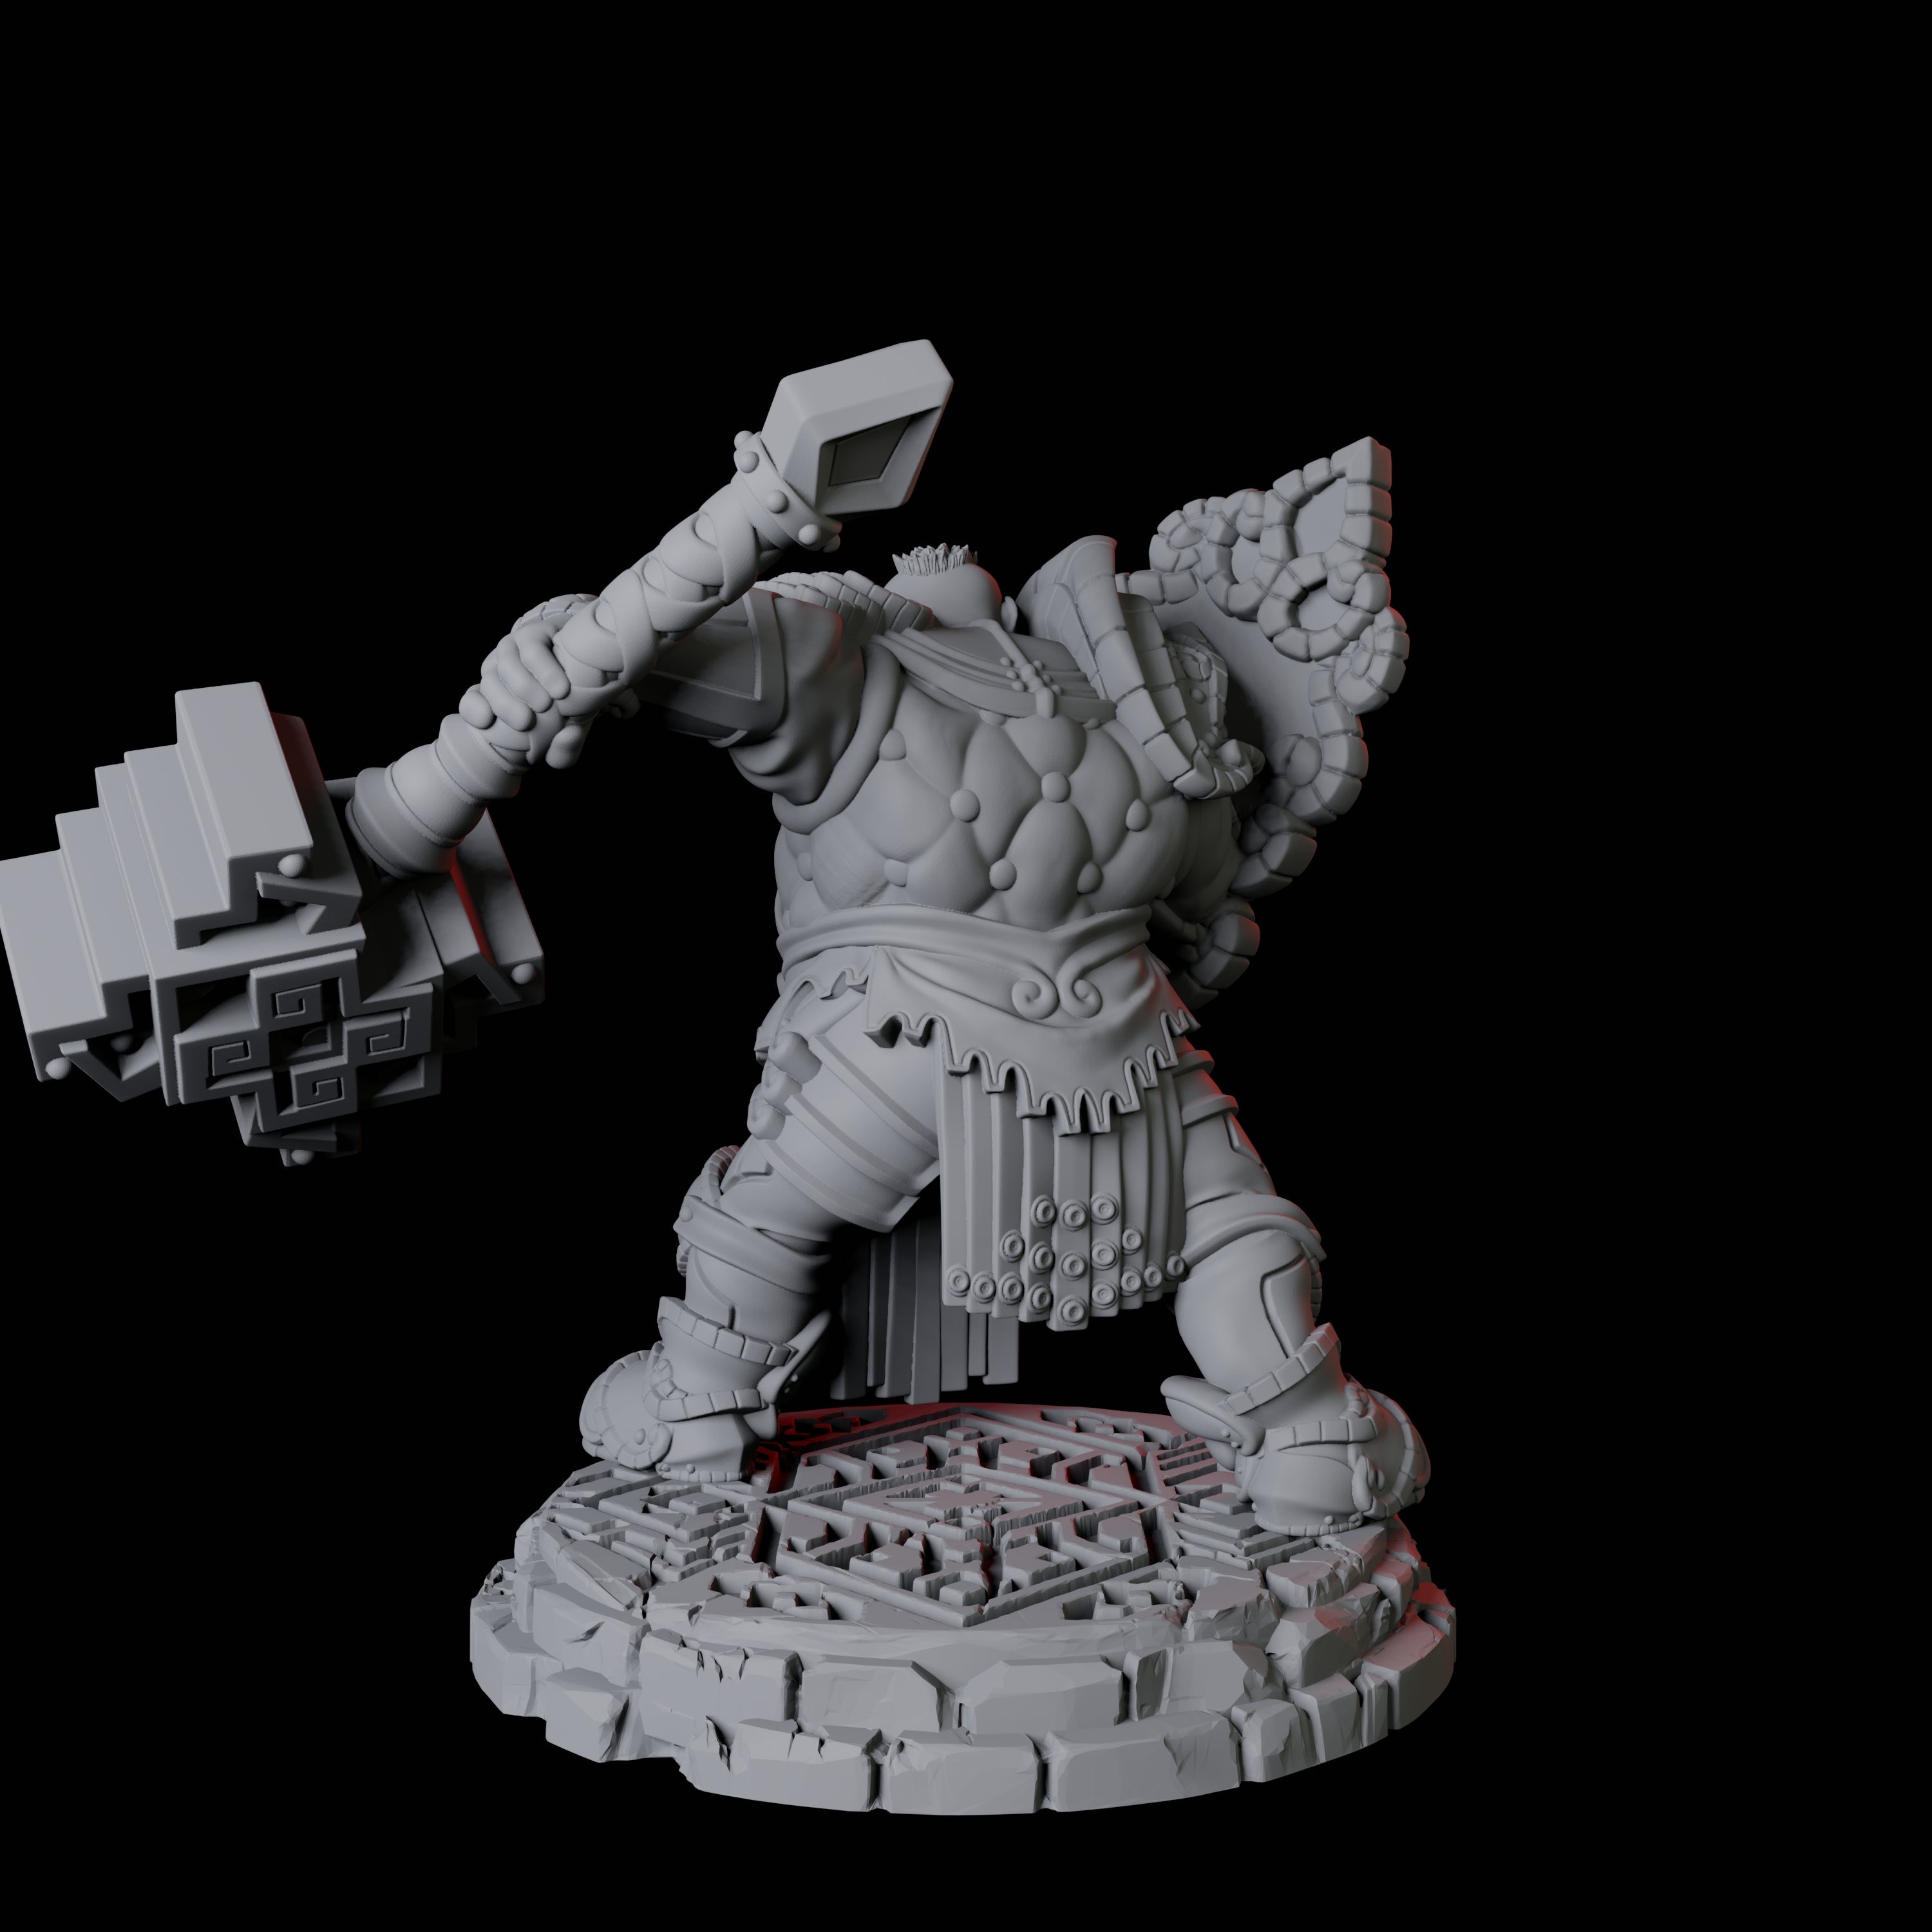 Heavy Armoured Dwarf Warrior C Miniature for Dungeons and Dragons, Pathfinder or other TTRPGs